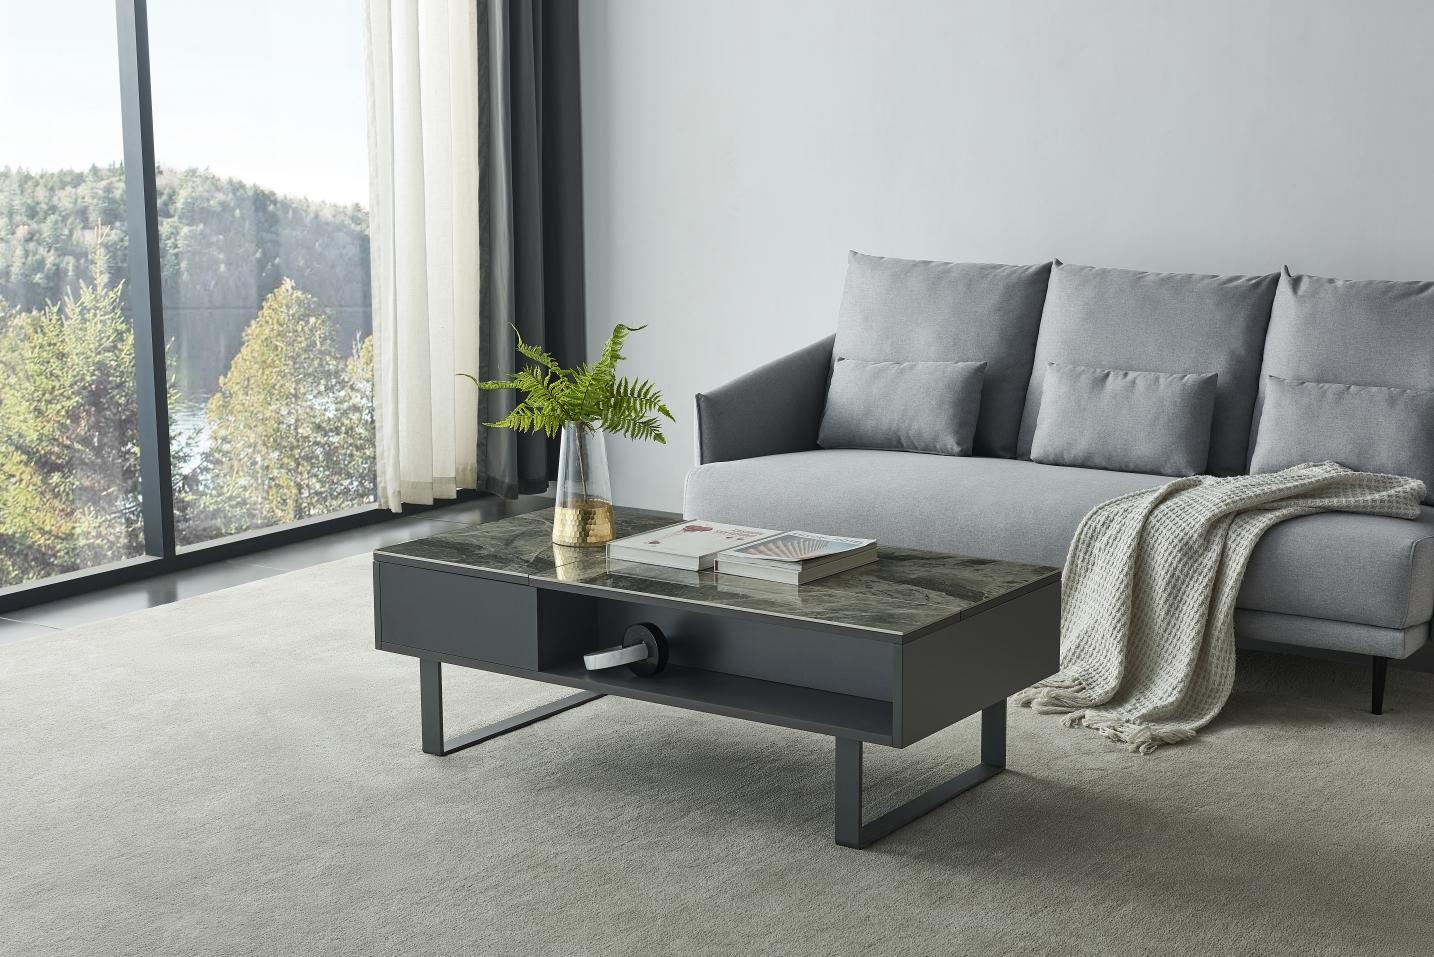 https://nyfurnitureoutlets.com/products/grey-marble-coffee-table-w-storage-made-in-italy-contemporary-460ct/1x1/434717-4-8586765301.jpg